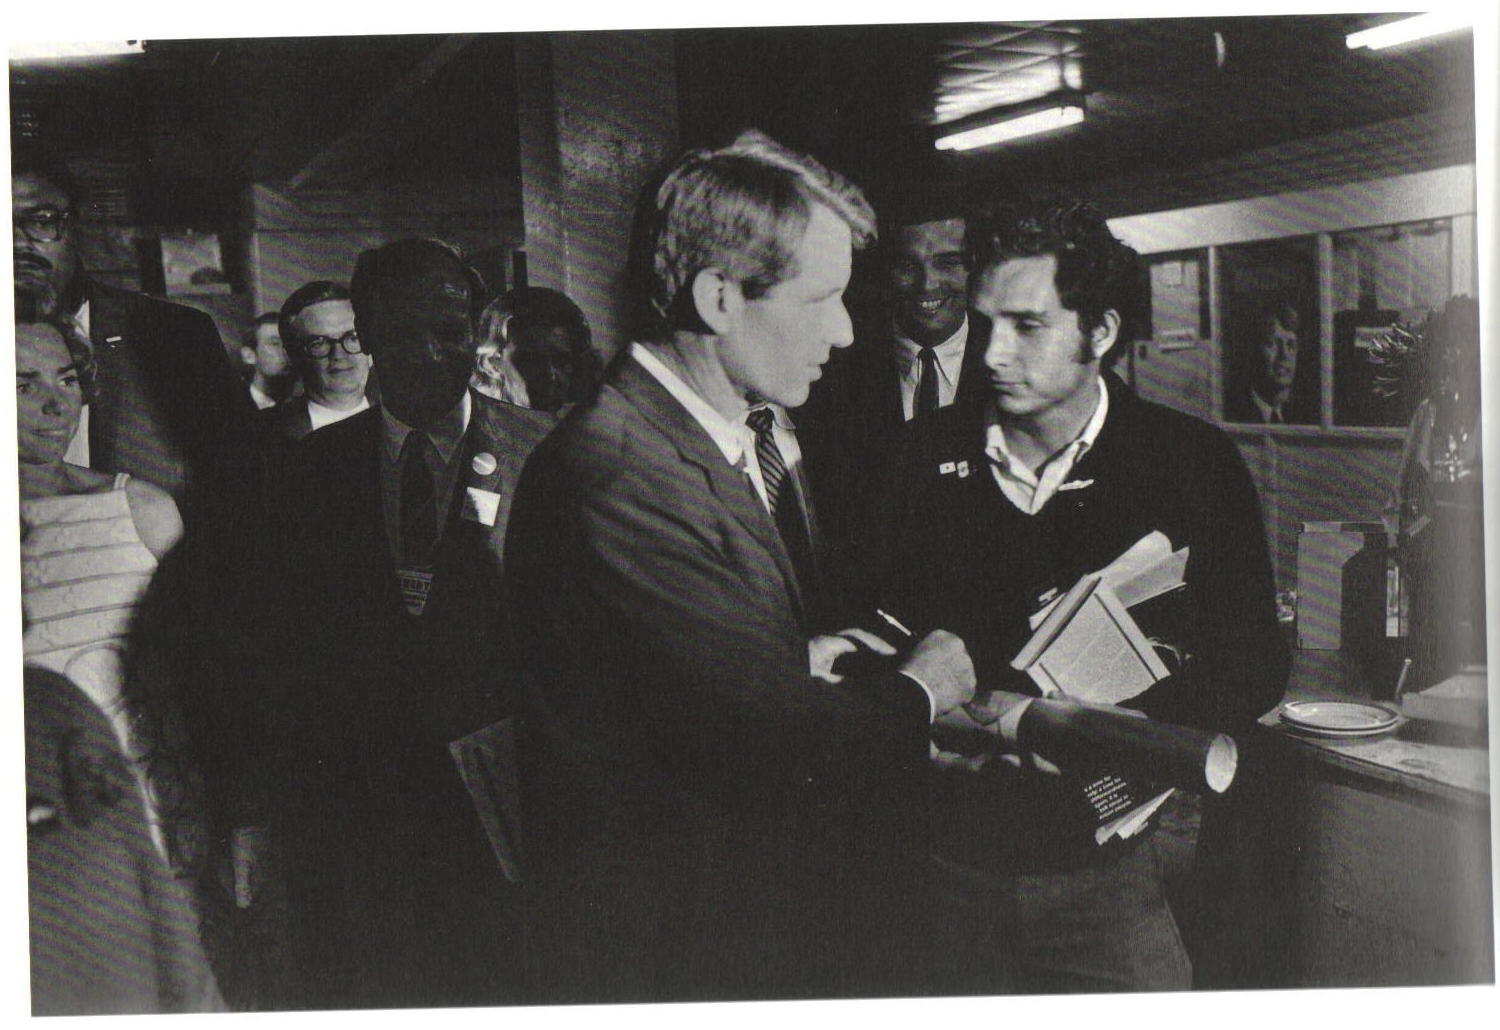 People's Exhibit 33; F3906:190; Trial; photo: RFK signing autograph for Michael Wayne